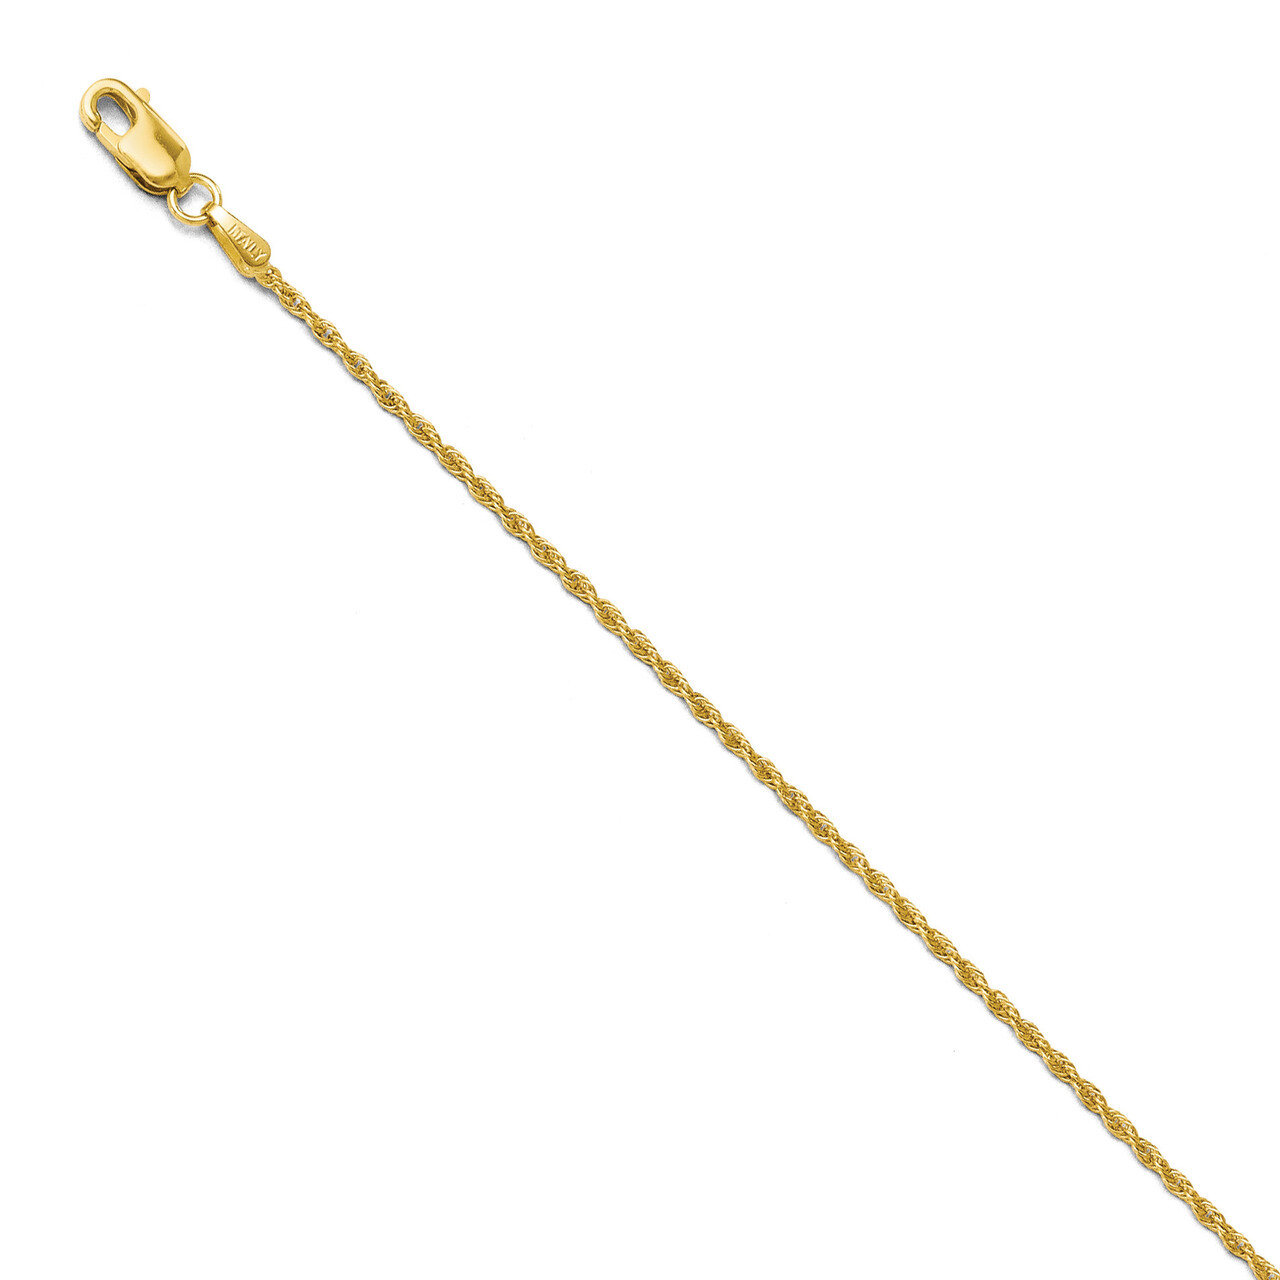 Pendant Rope Chain 16 Inch - 14k Gold HB-727-16